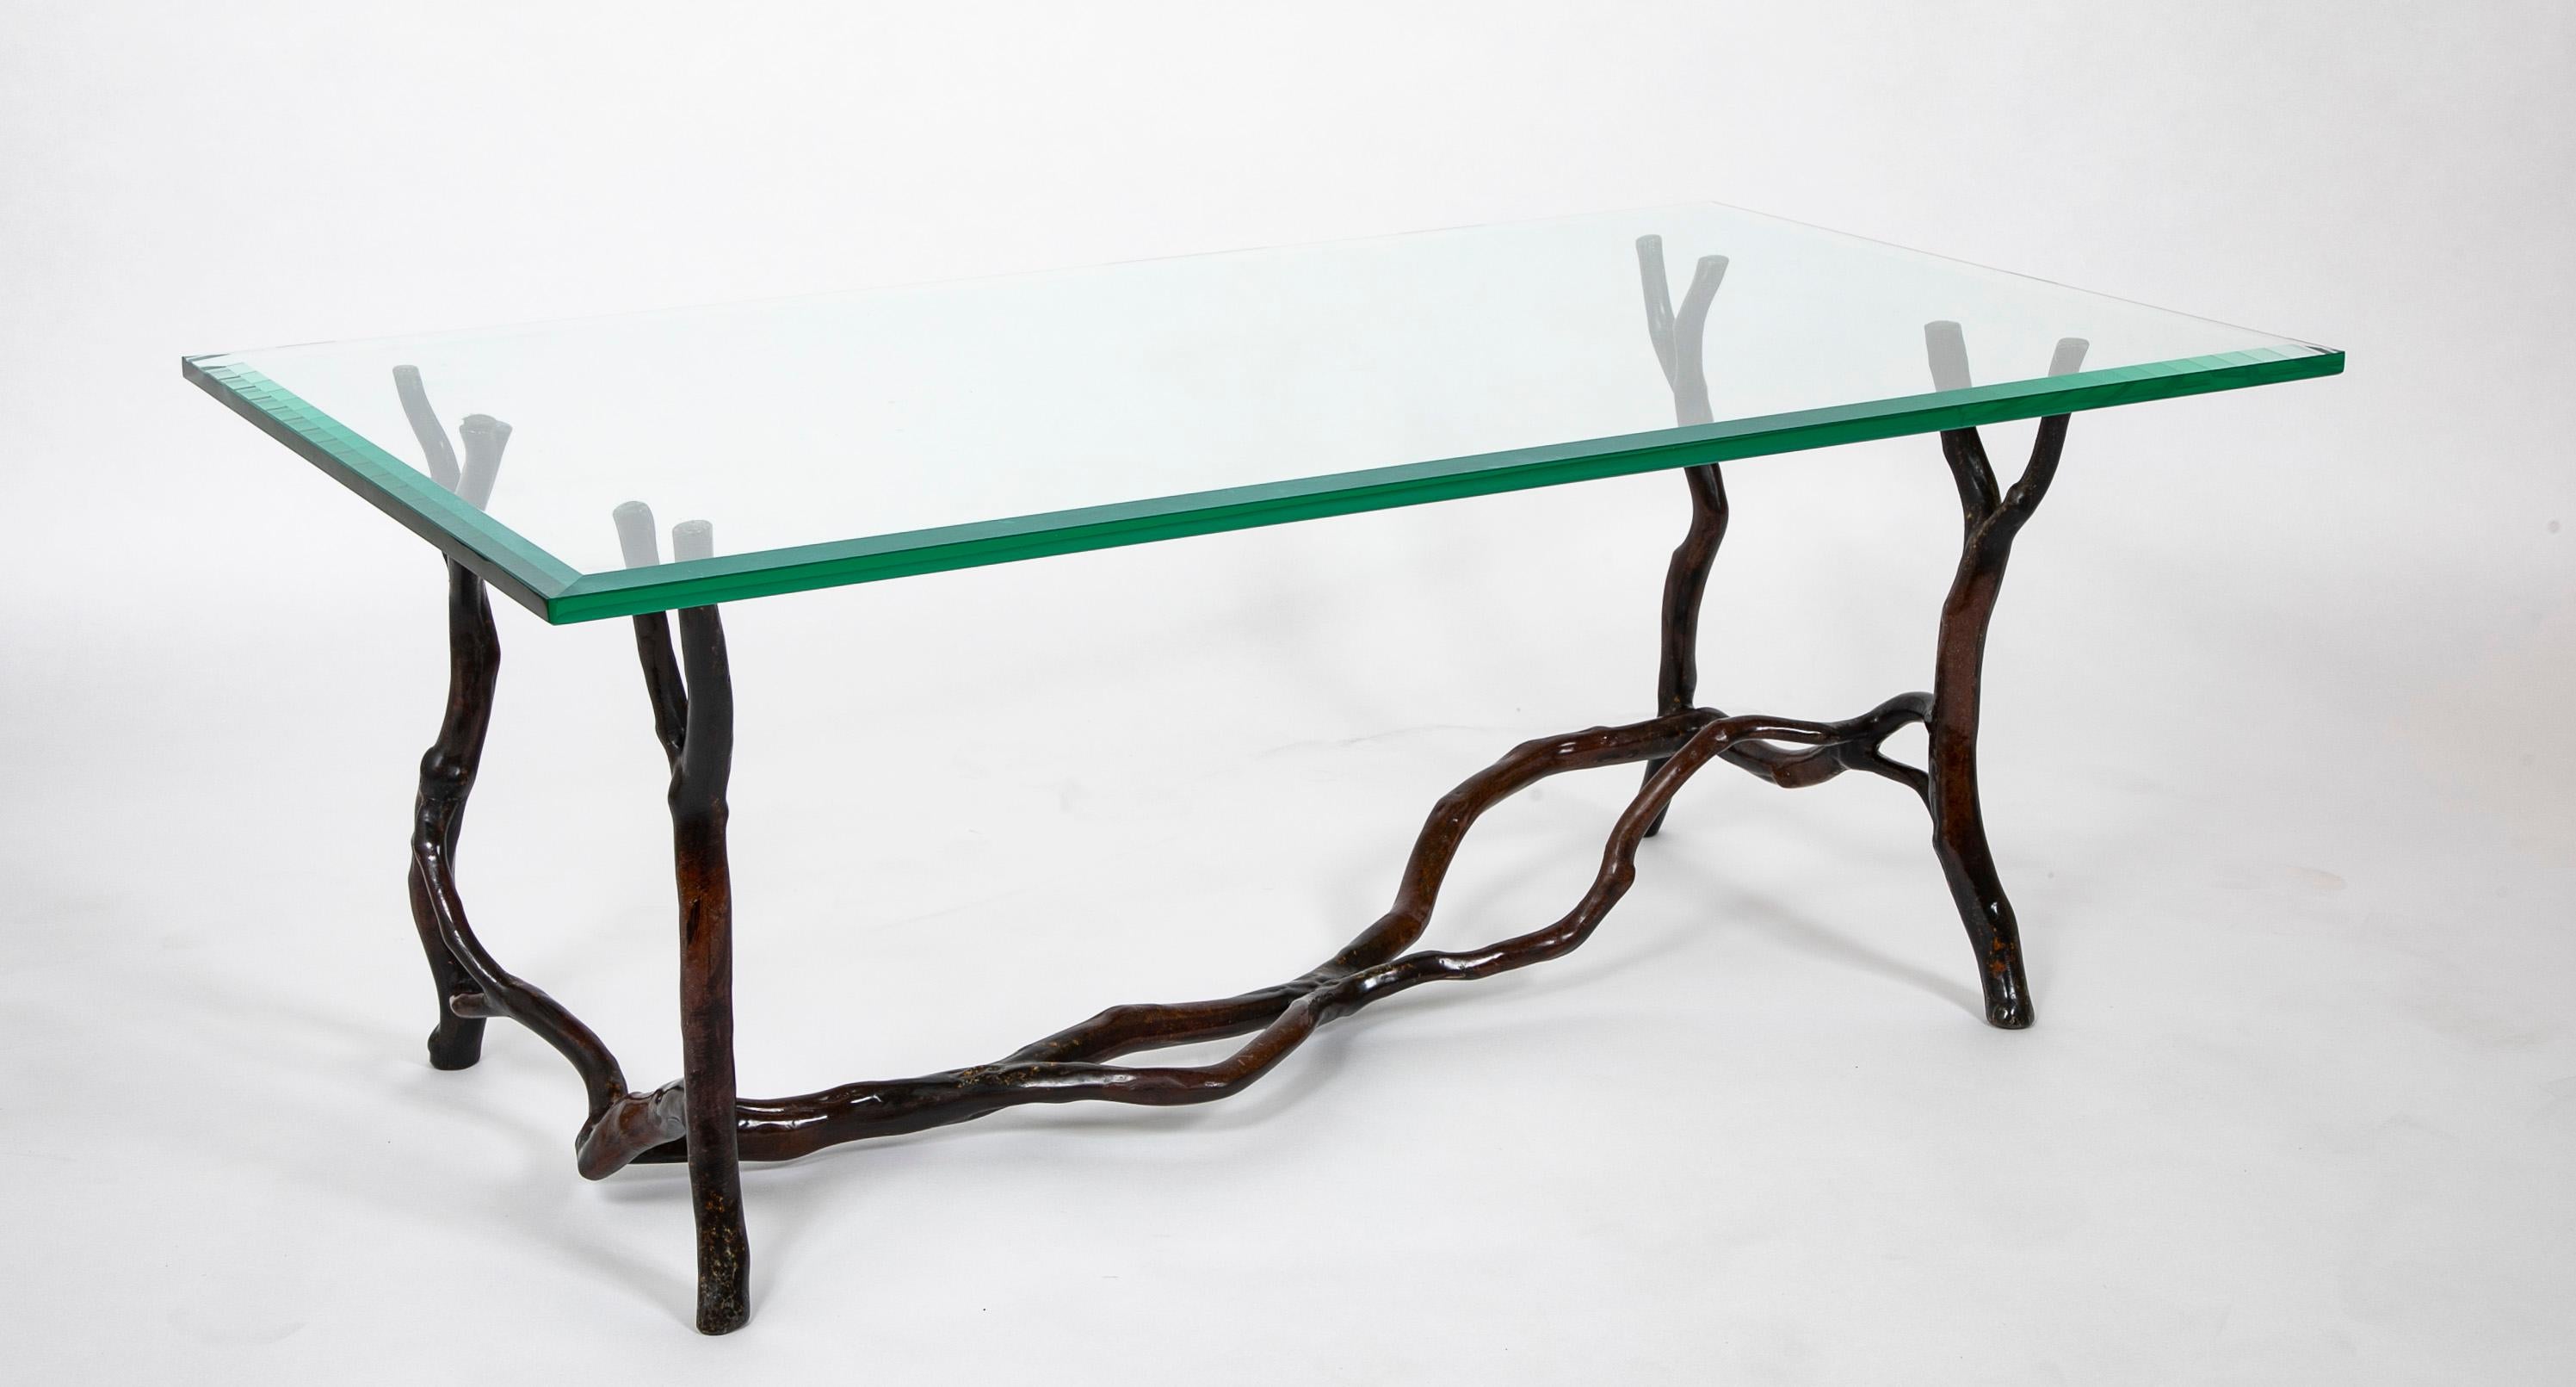 A bronze frame glass top coffee table having tree branch form attributed to American artist Carl Gillberg.